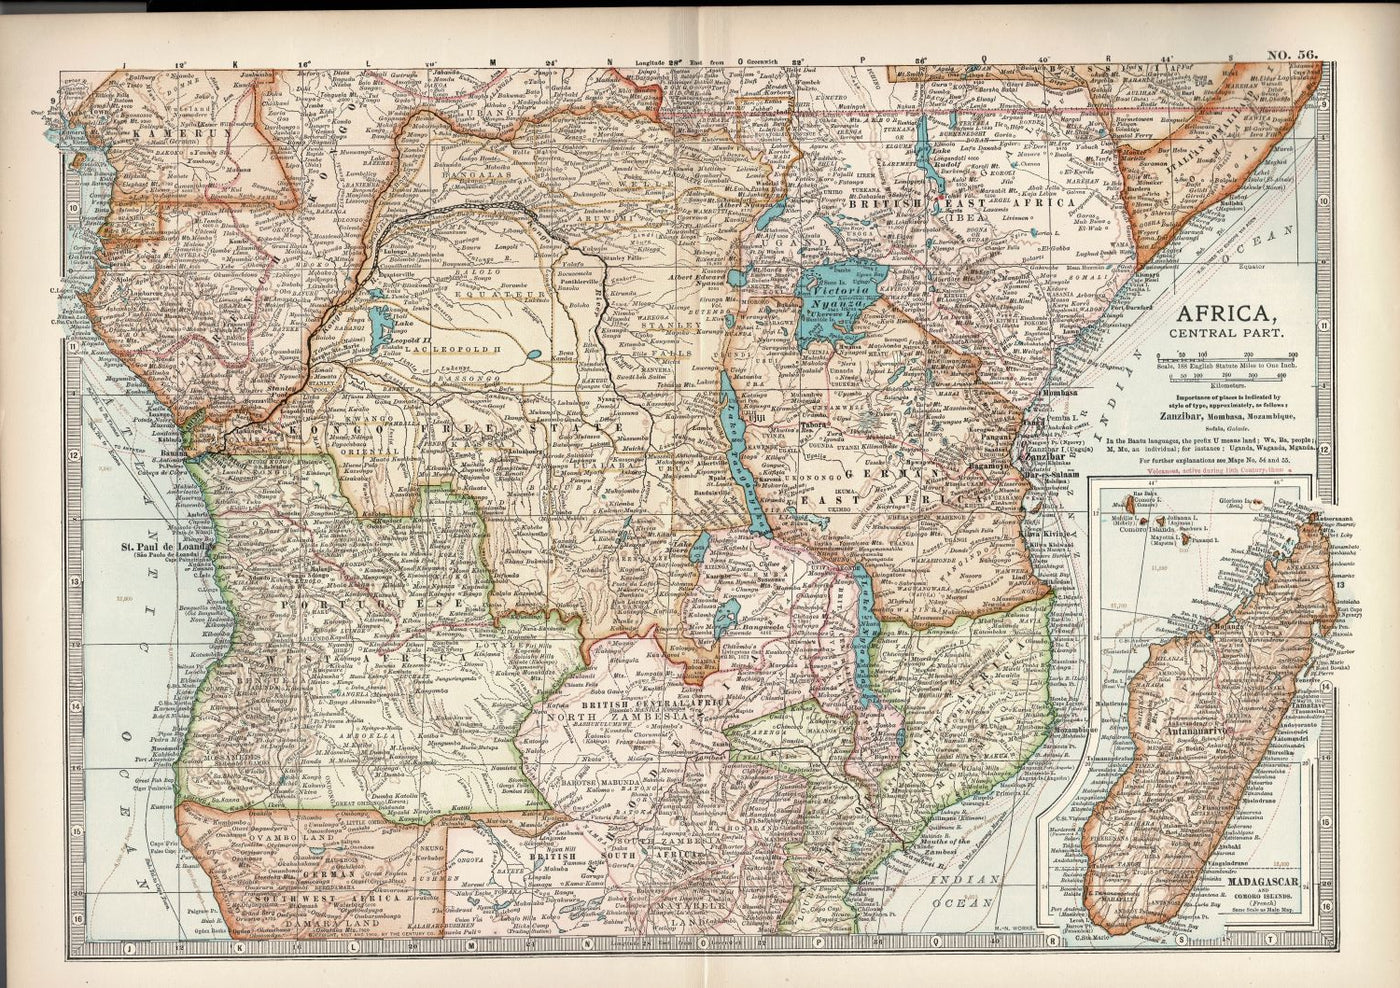 Africa Central Part antique map from Encyclopaedia Britannica 1903